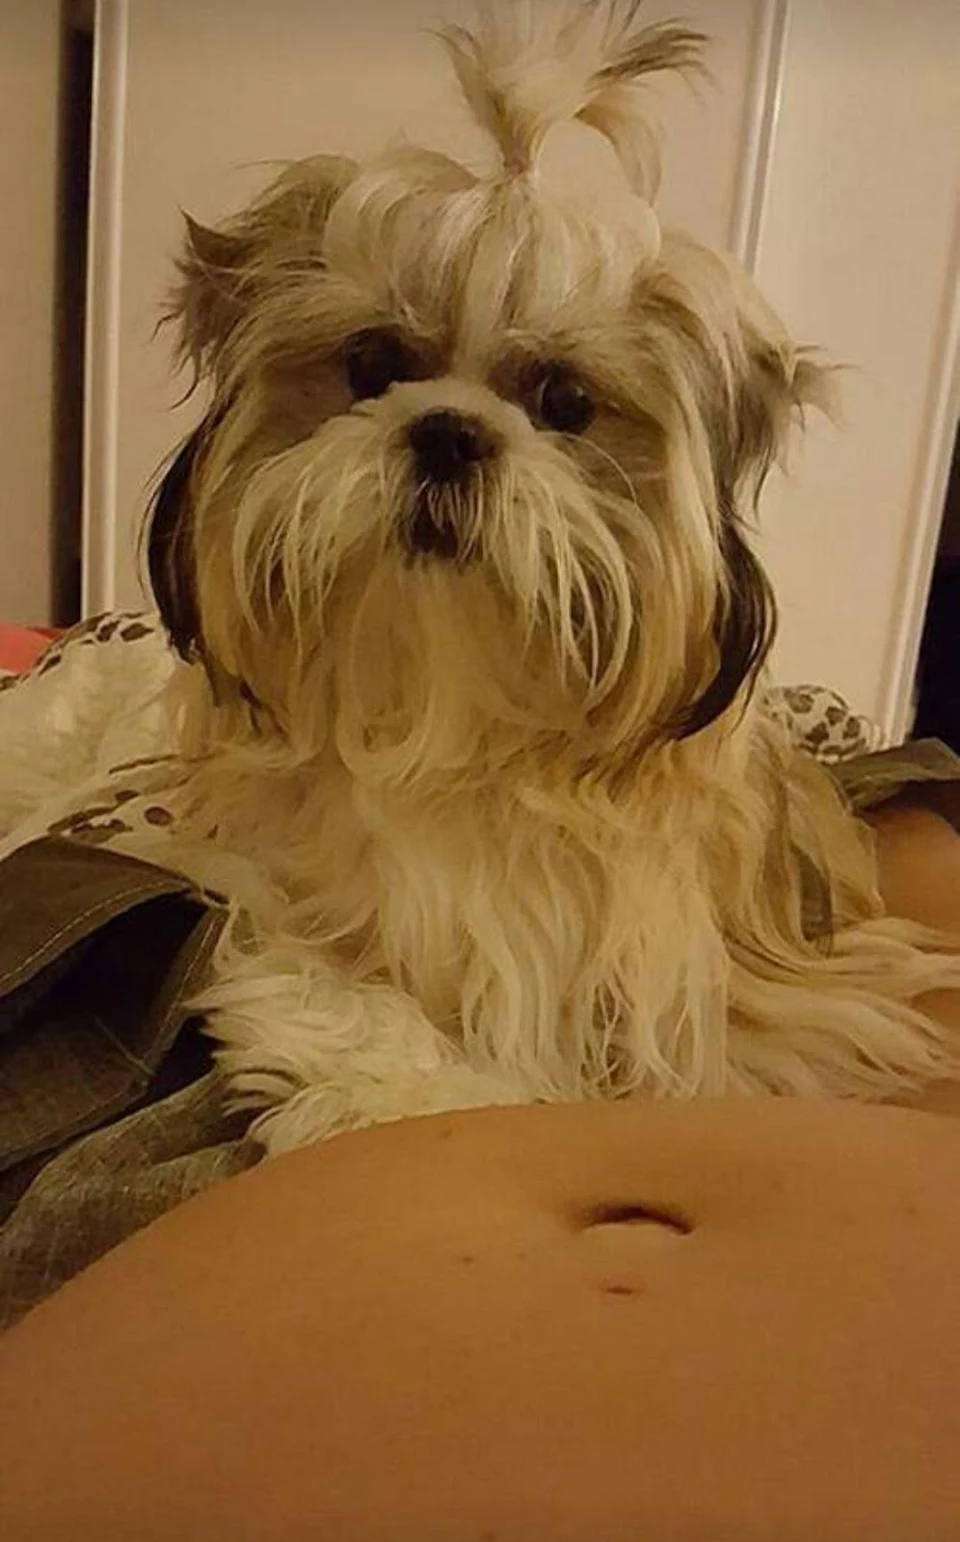 Shih-tzu. she is waiting for the arrival of the new member that is in my belly. isn't it very cute